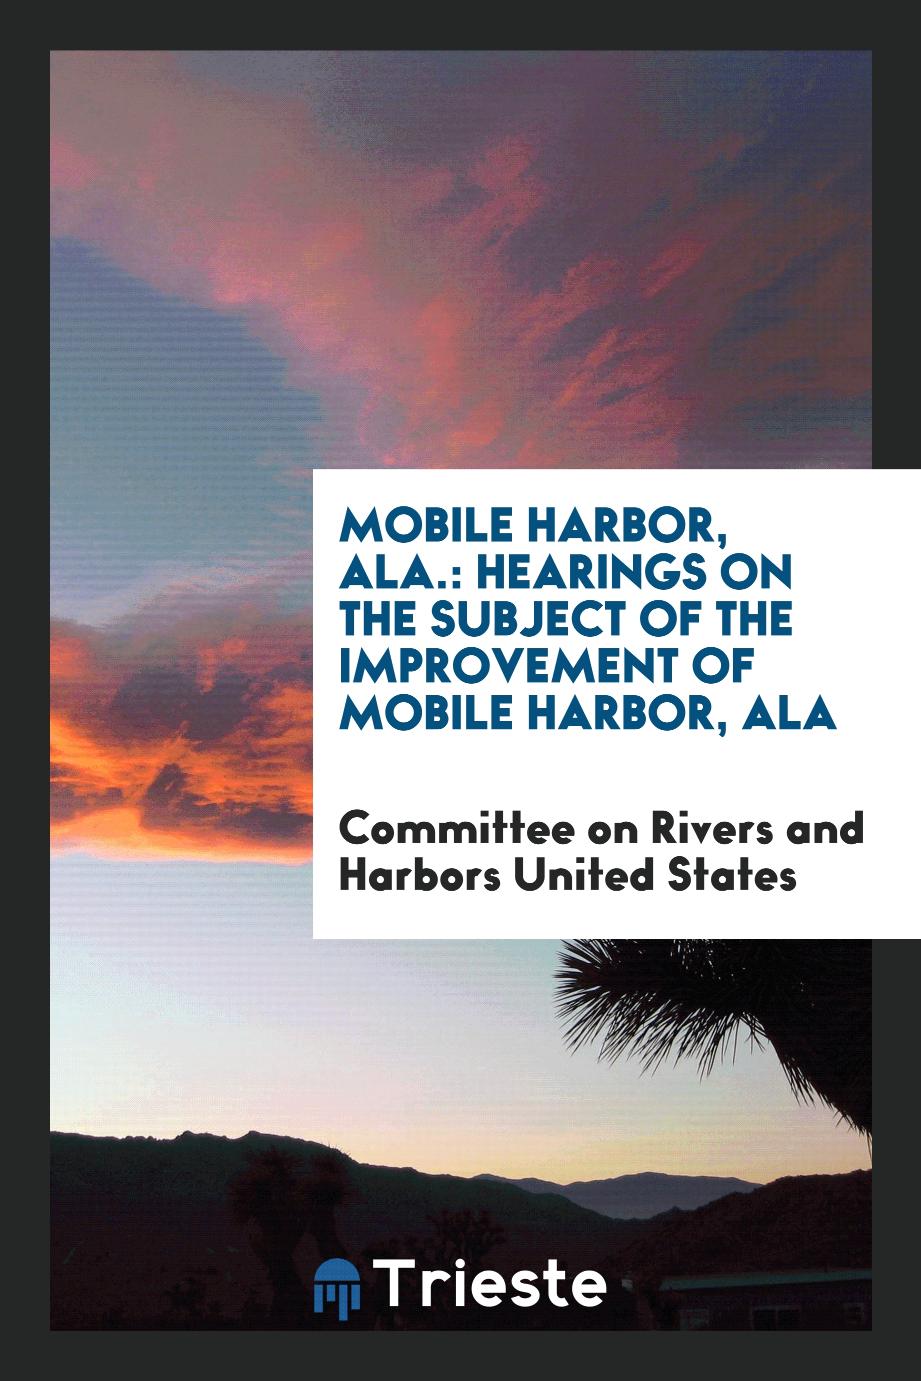 Mobile Harbor, Ala.: Hearings on the Subject of the Improvement of Mobile Harbor, Ala